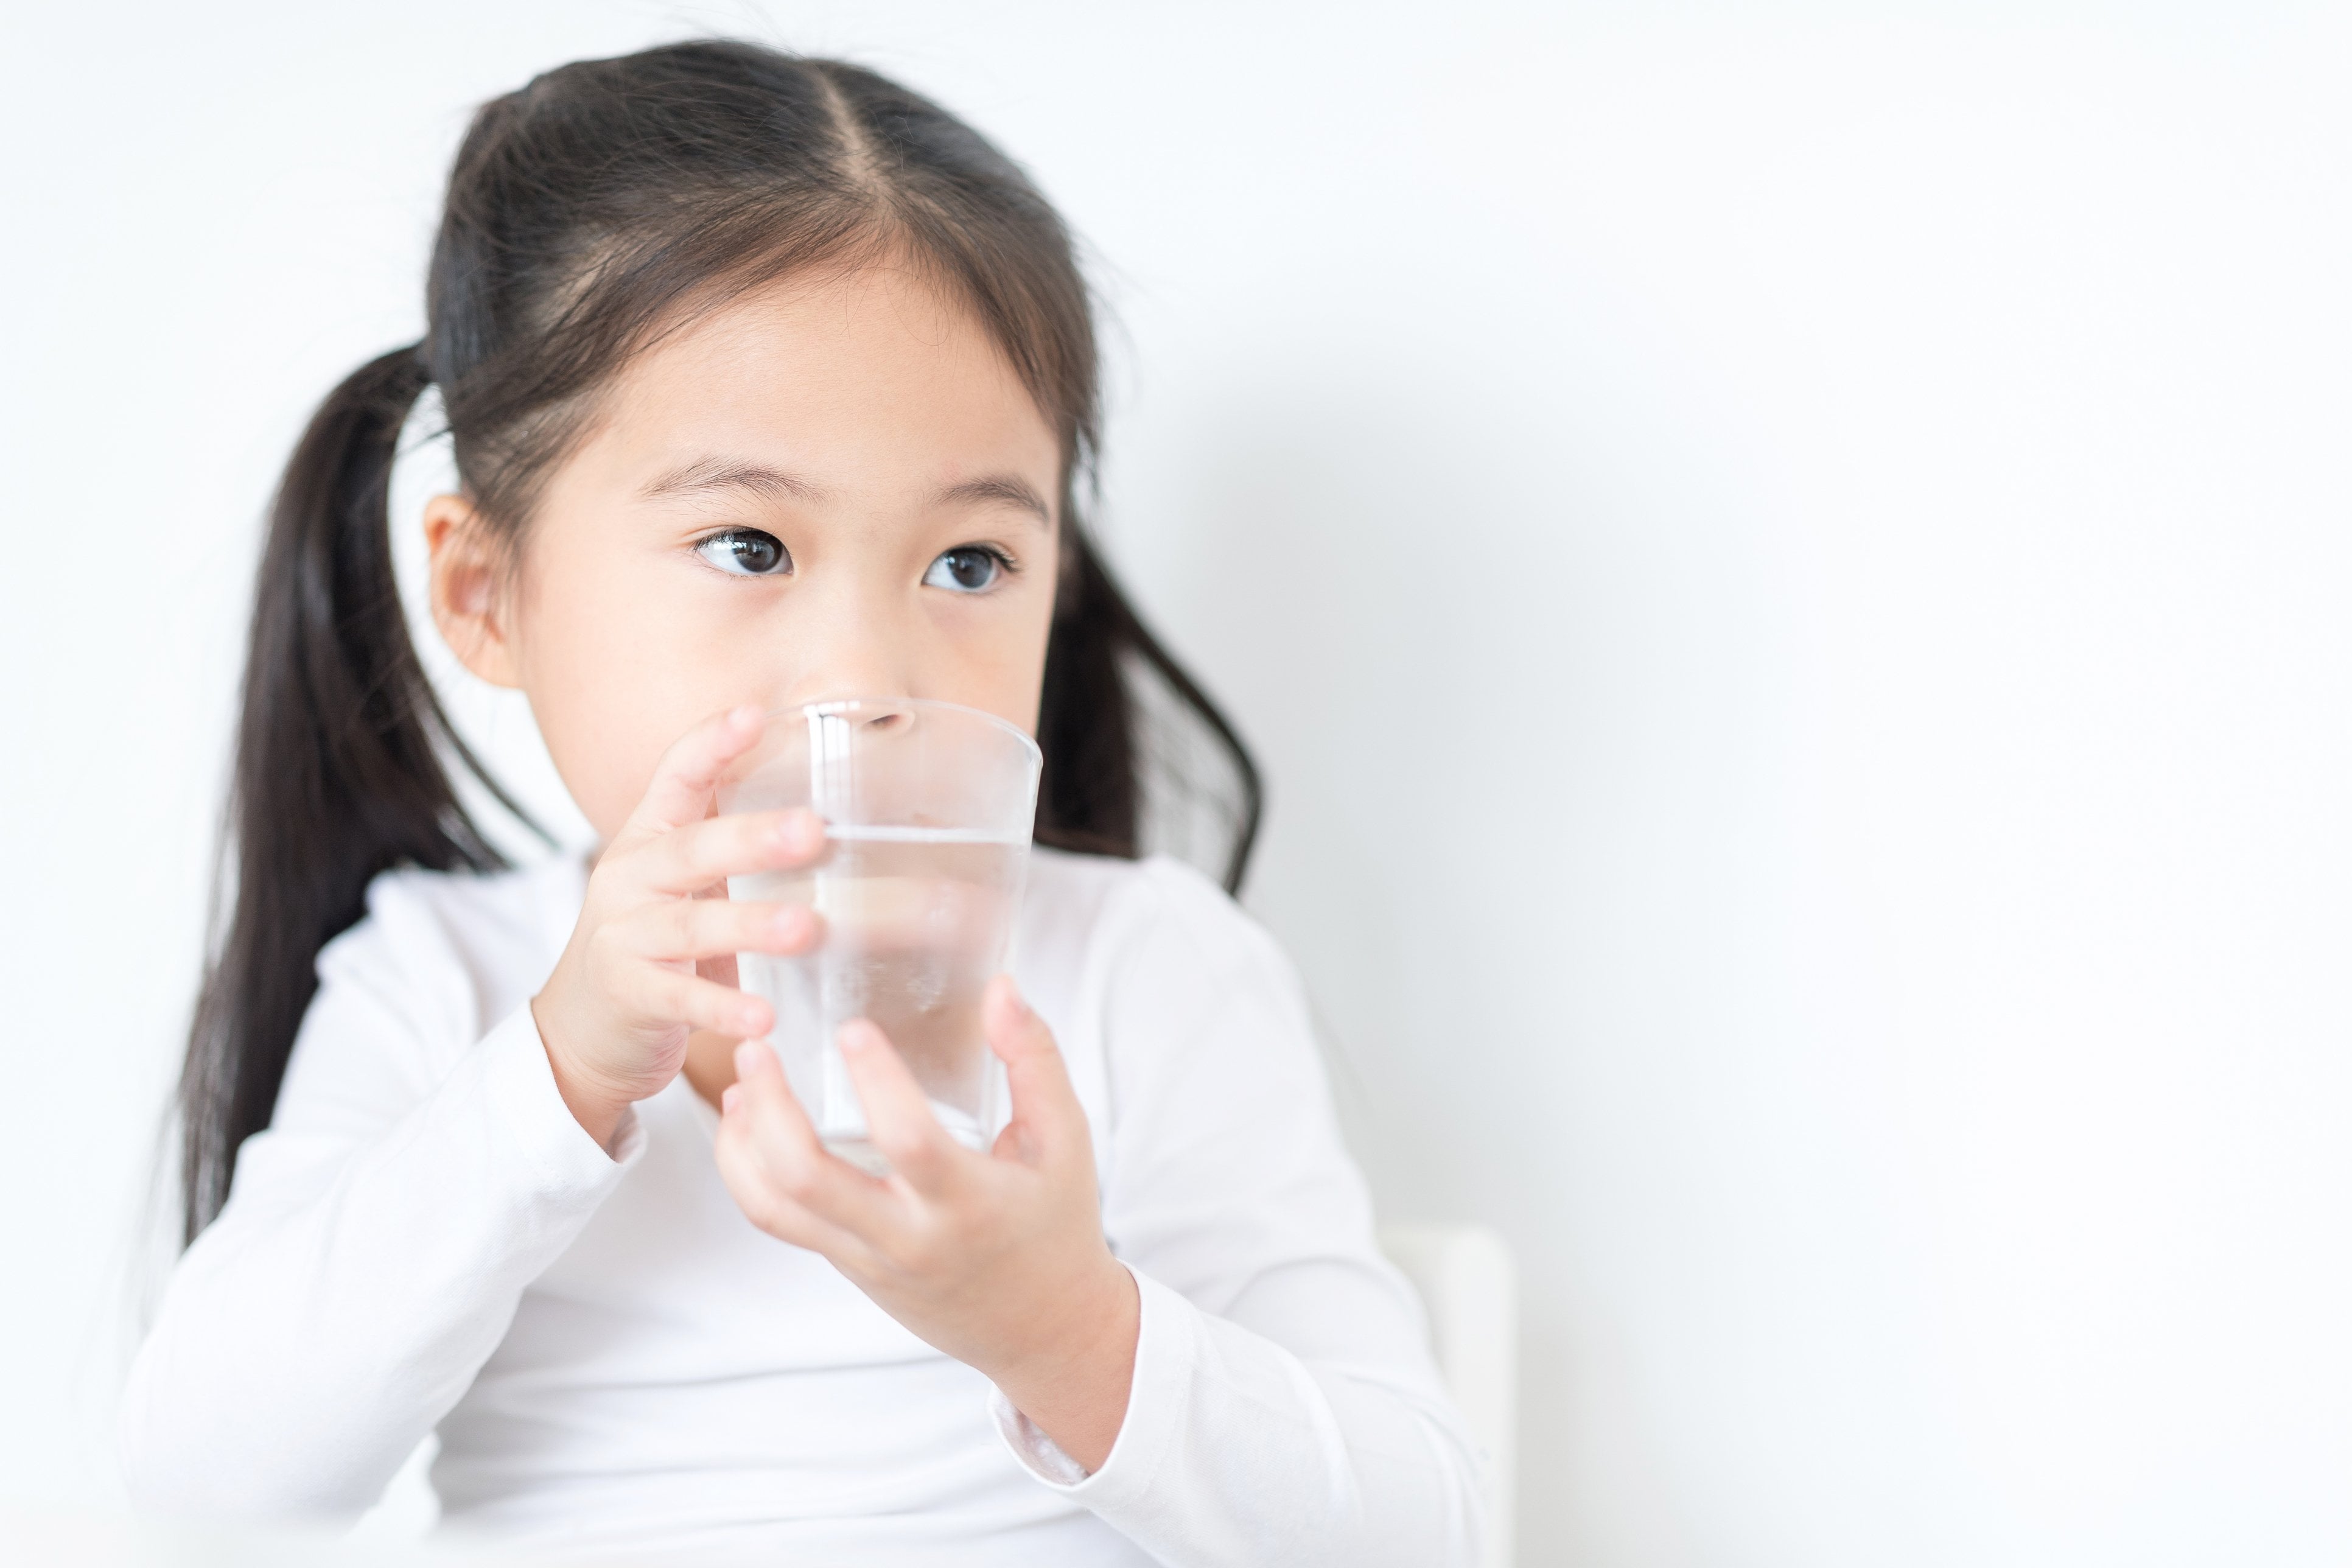 What is The Safe Drinking Water Act?